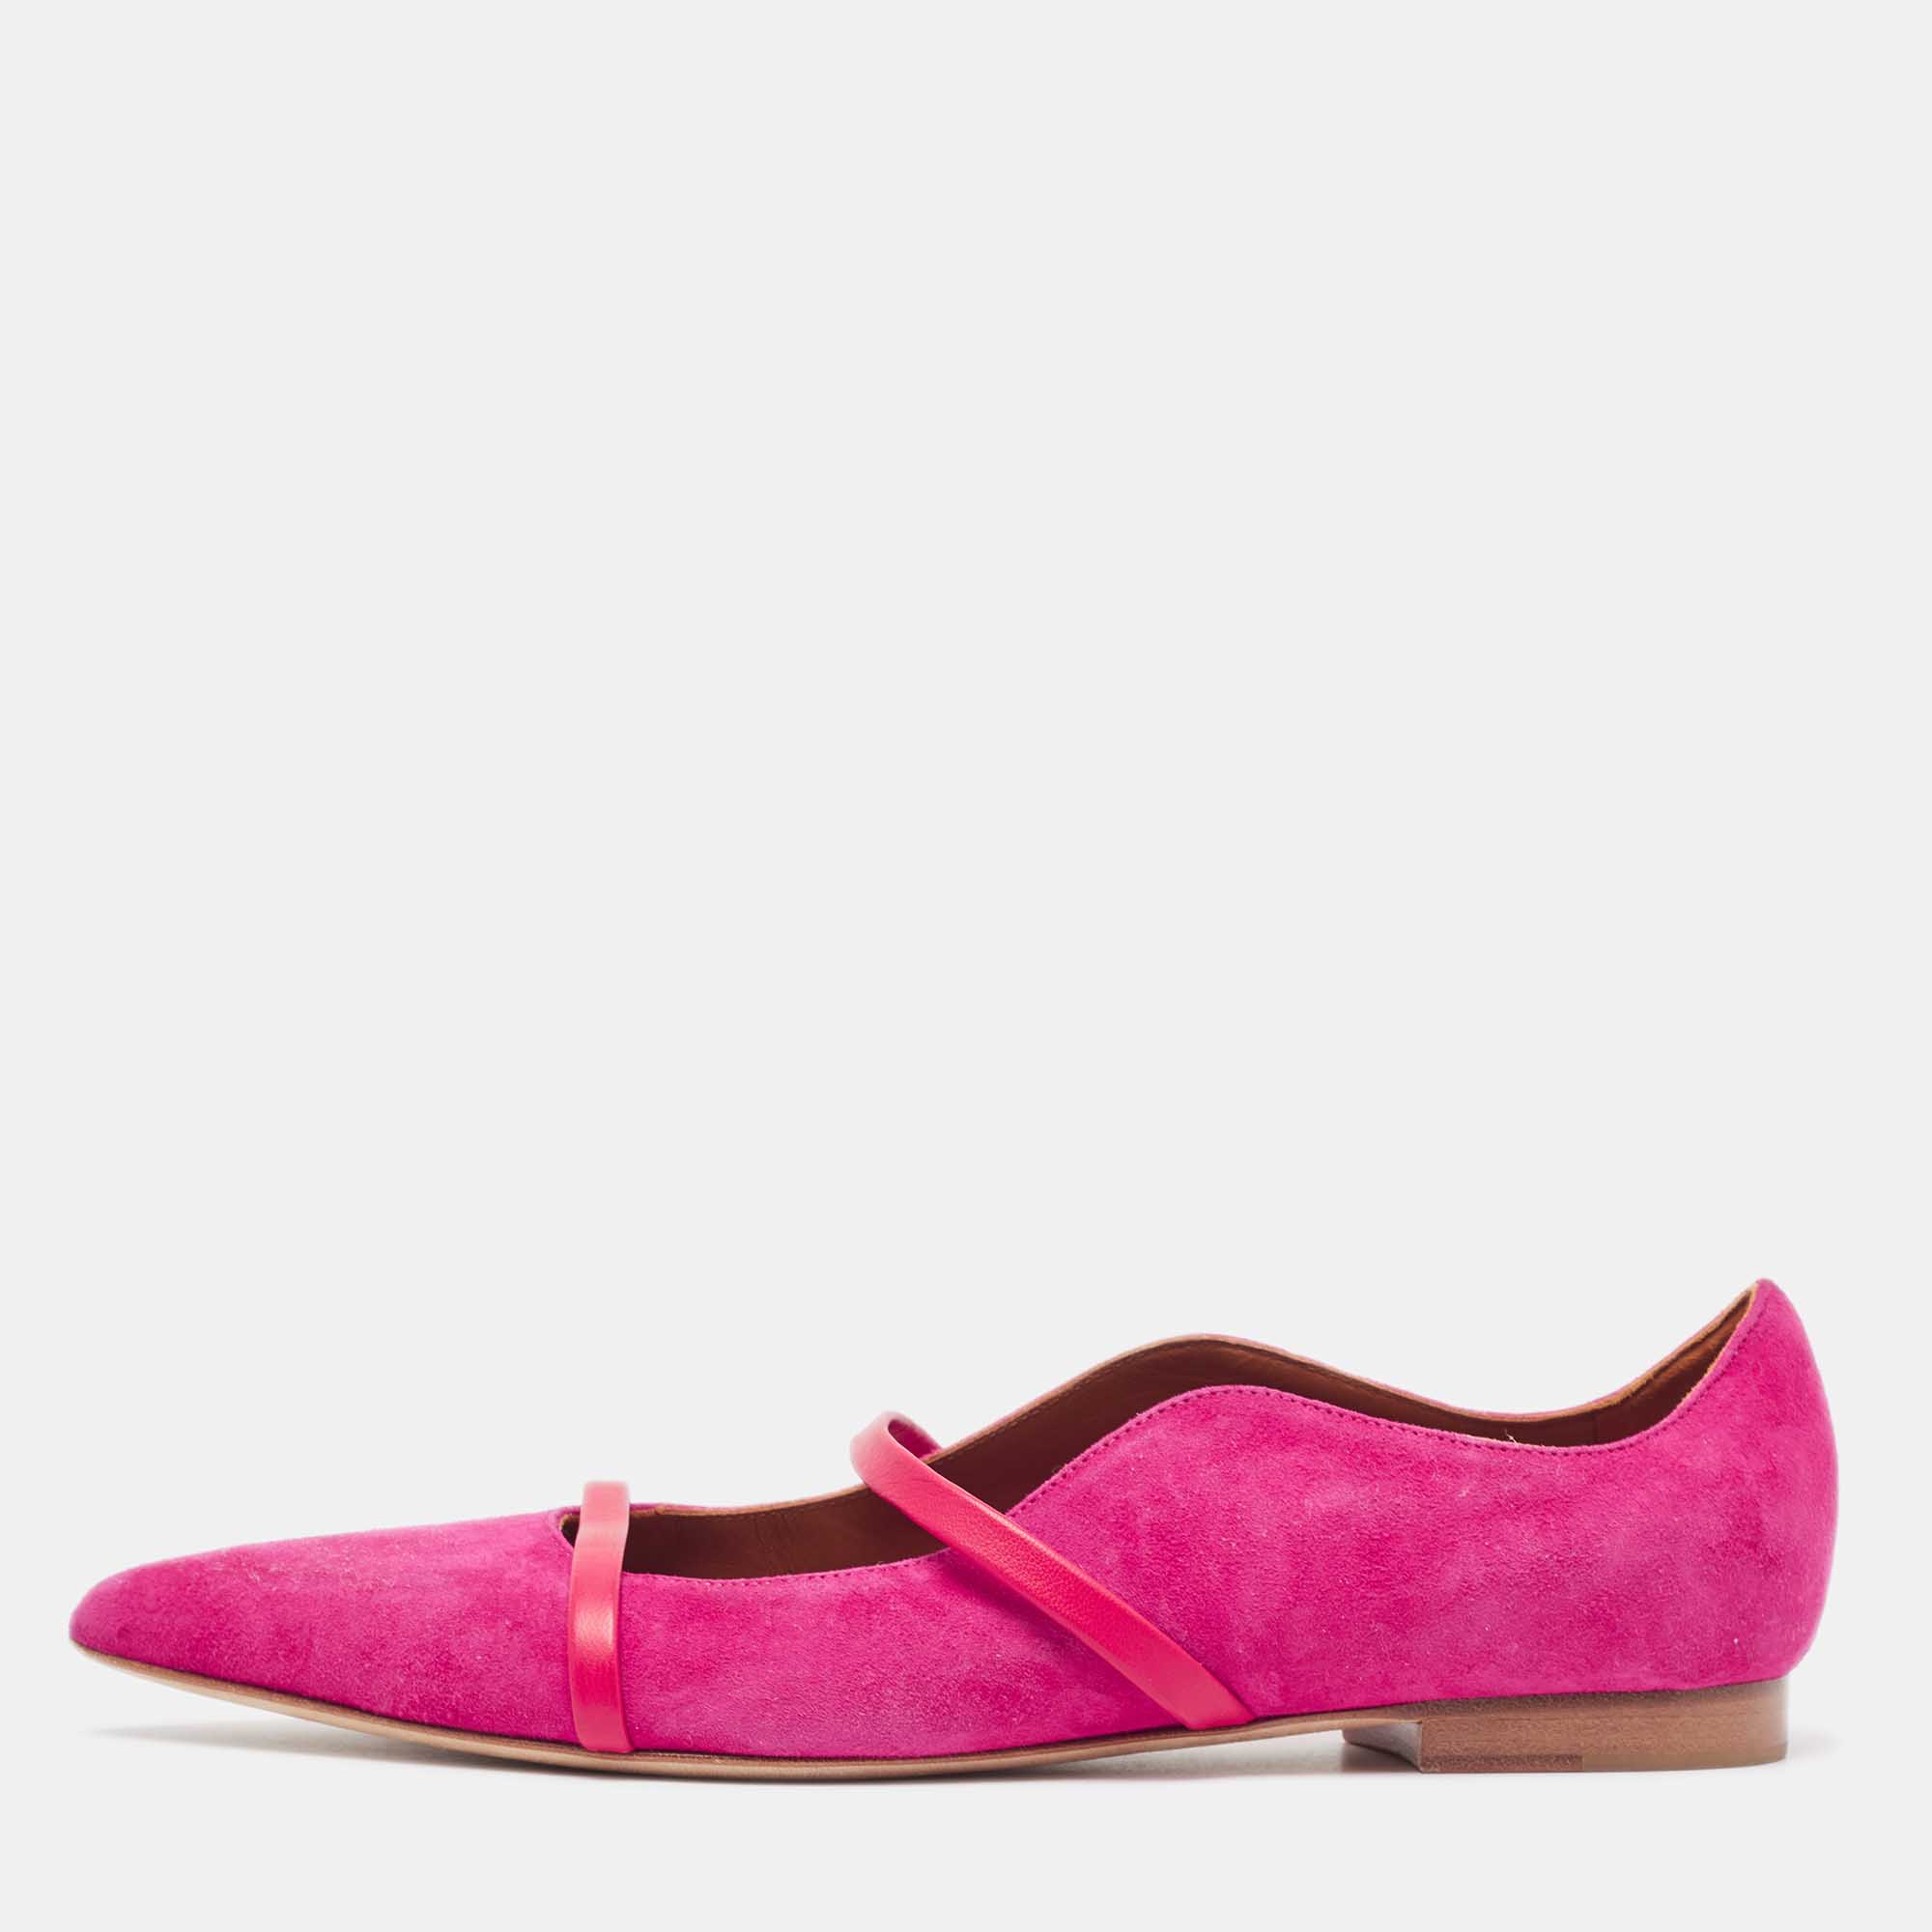 Malone souliers fuchsia/red suede maureen ballet flats size 39